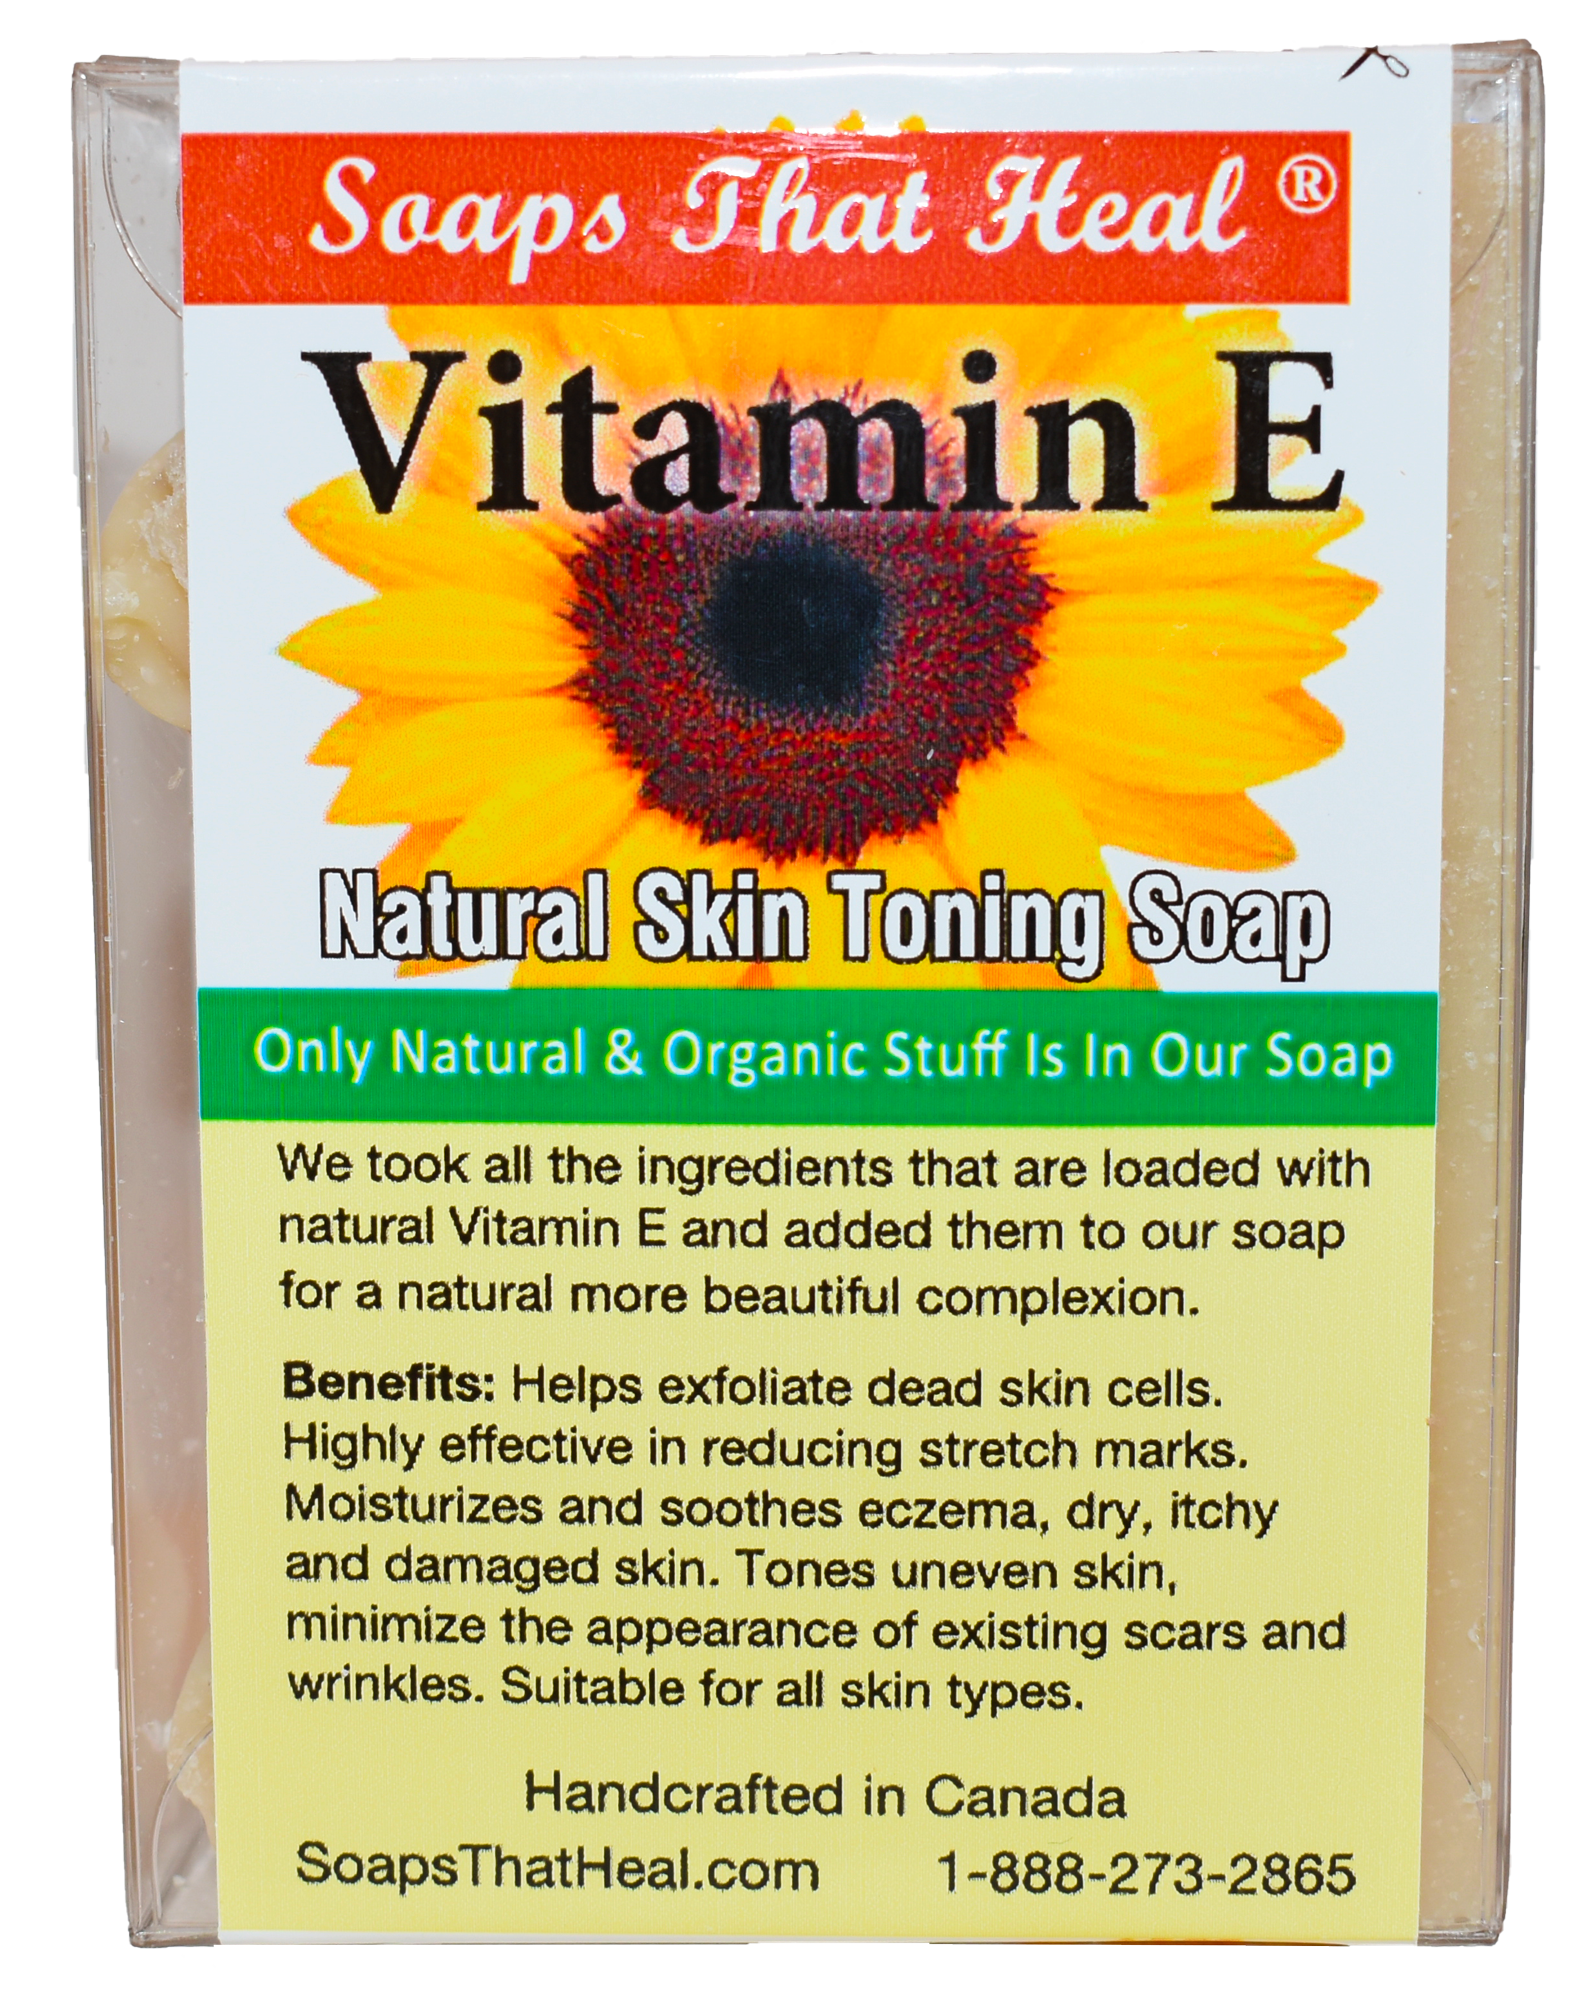 vitamin e soap,natural alternatives to whitening creams,fade creams,bleaching creams,Remove Dark Spots and Acne,aspen kay,Healthy Skin,natural skin care products,problem skin,the best body soap,saje,soaps that heal,healing soap, how to get rid of dark marks,dark spots,whitening soaps,lightening soaps,hyperpigmentation,vitamin e soap, toning, exfoliating,dead skin cells,pores,organic soap